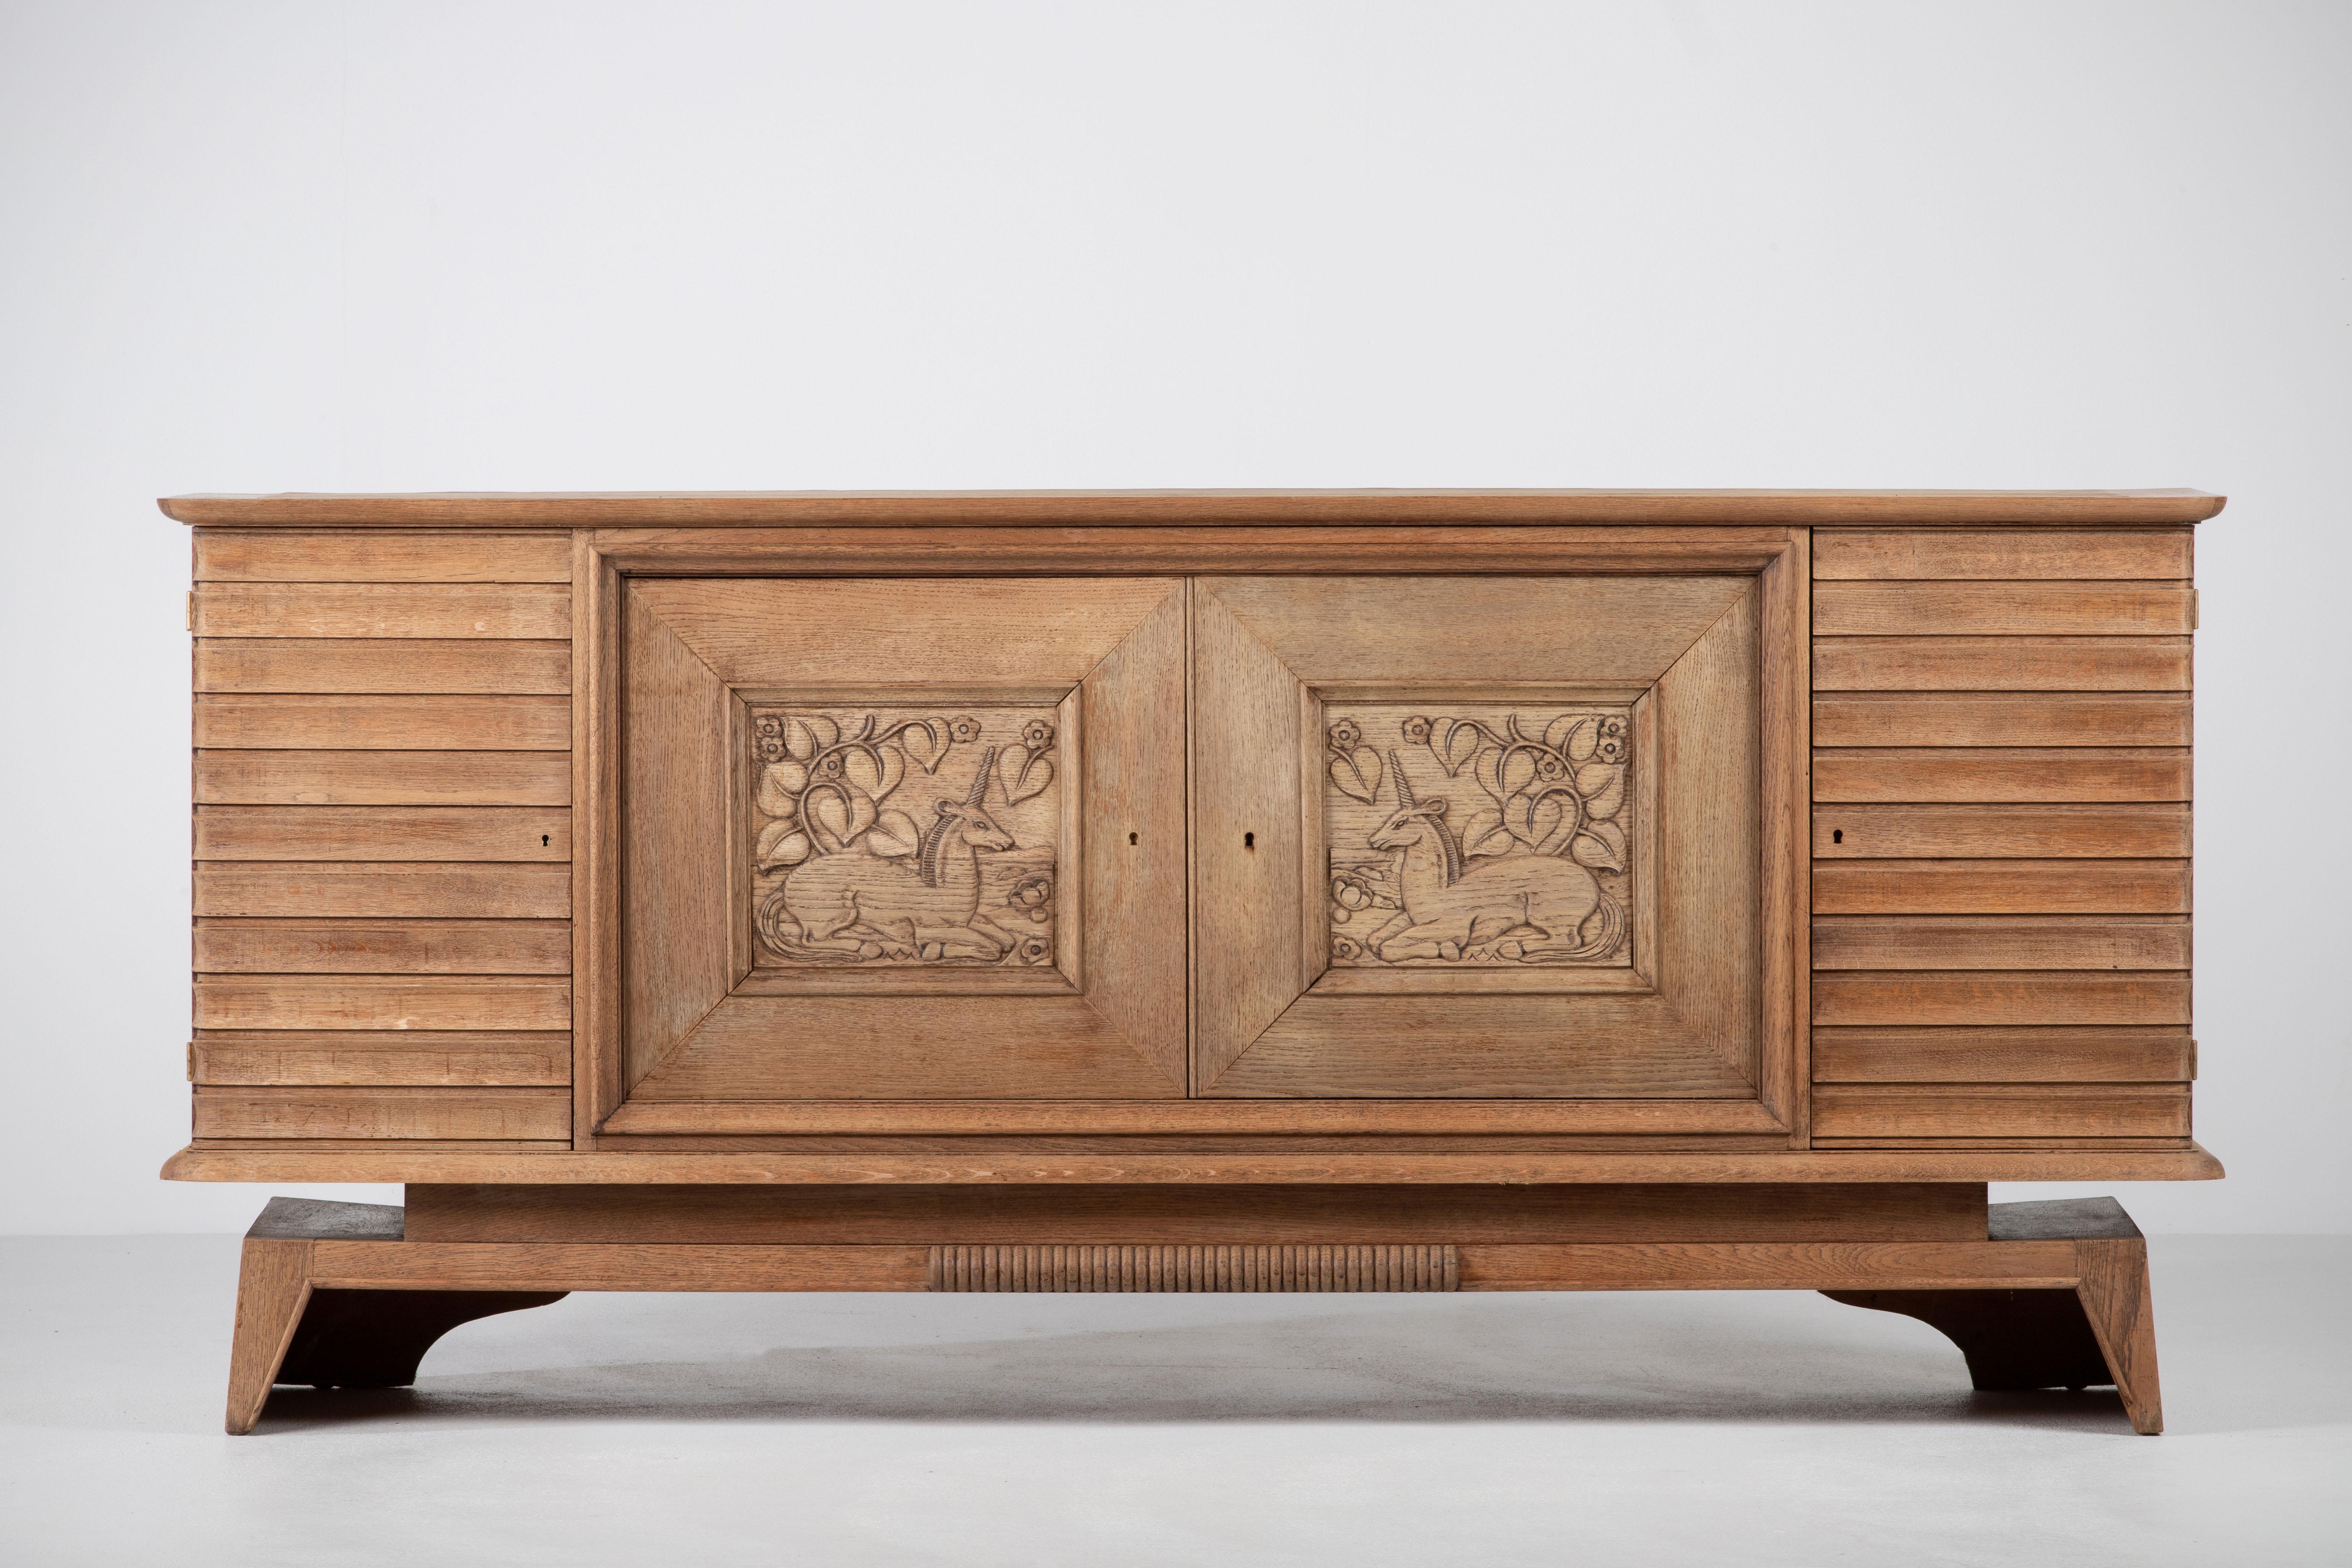 Credenza, solid oak, France, 1940s, attributed to Charles Dudouyt.
Large Art Deco Brutalist sideboard. 
The credenza consists of two storage facilities covered with very detailed designed door panels, in the center a floral sculpture.
 